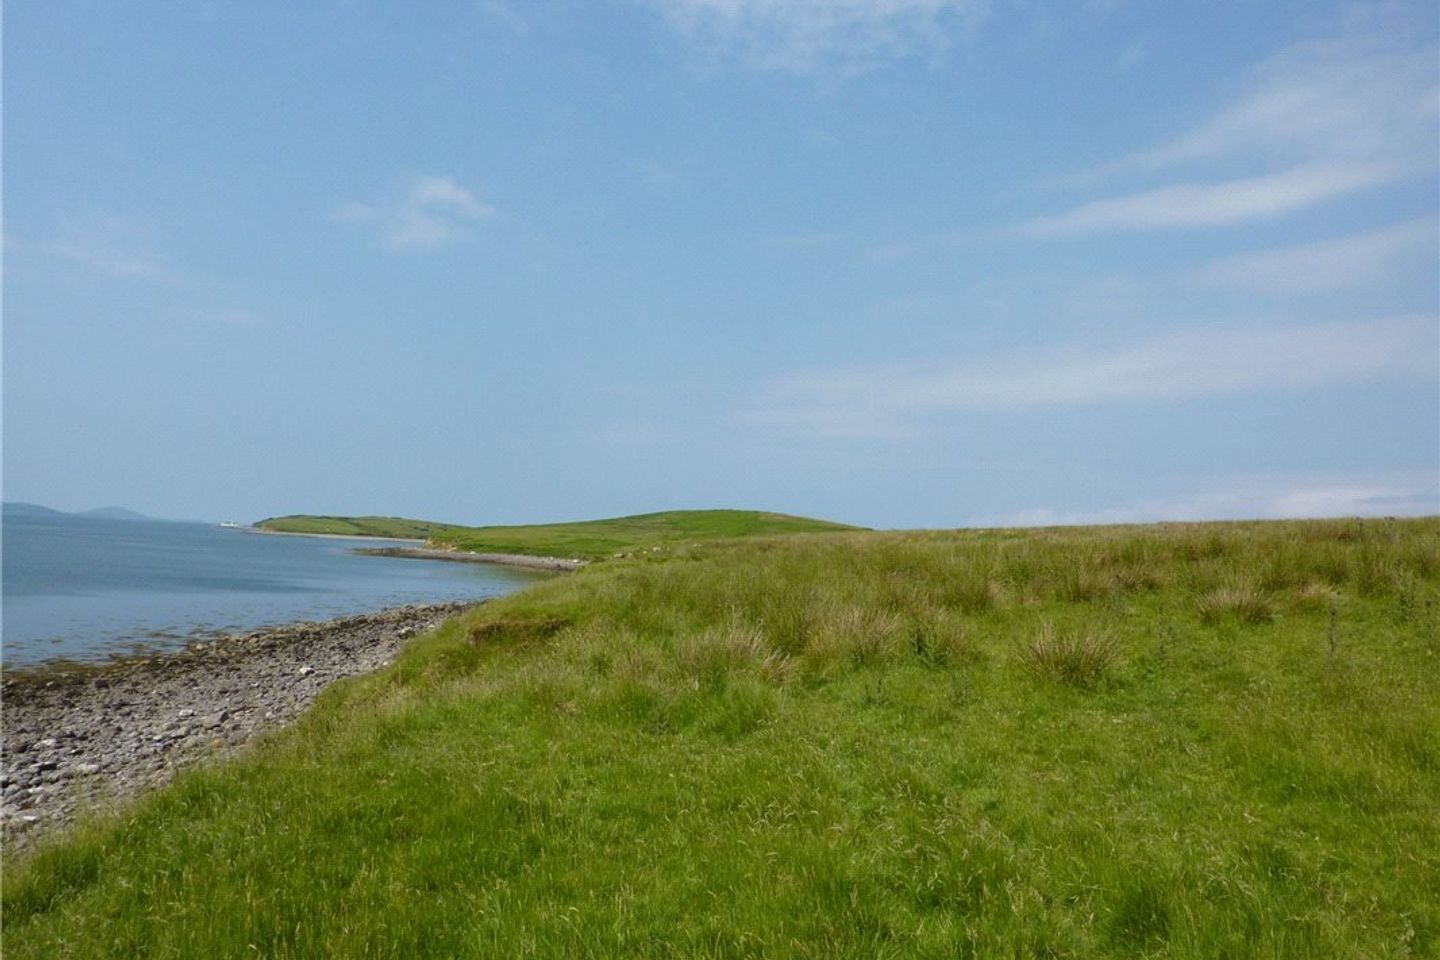 Agricultural Land, Collanmore Island